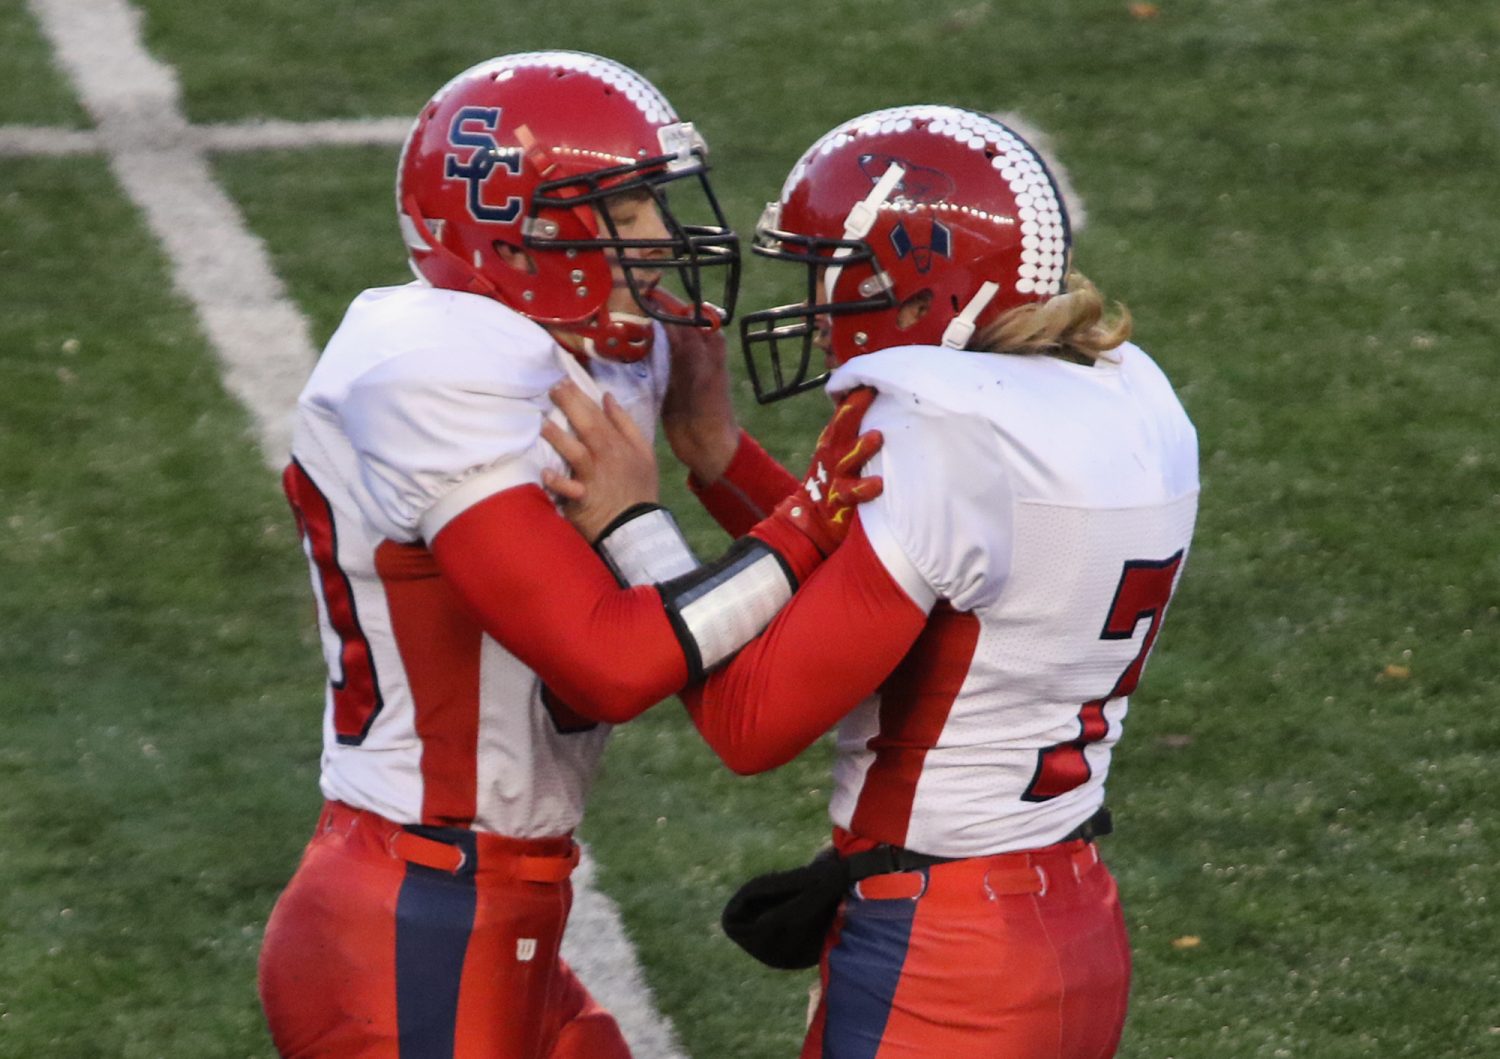 Spencer/Columbus' Ryan Busse, left, and Calvin Lenz celebrate a defensive play as the Rockets lost to Amherst 42-0 in the WIAA Division 5 State Championship Game at Camp Randall Stadium in Madison, Thursday, Nov. 19, 2015.